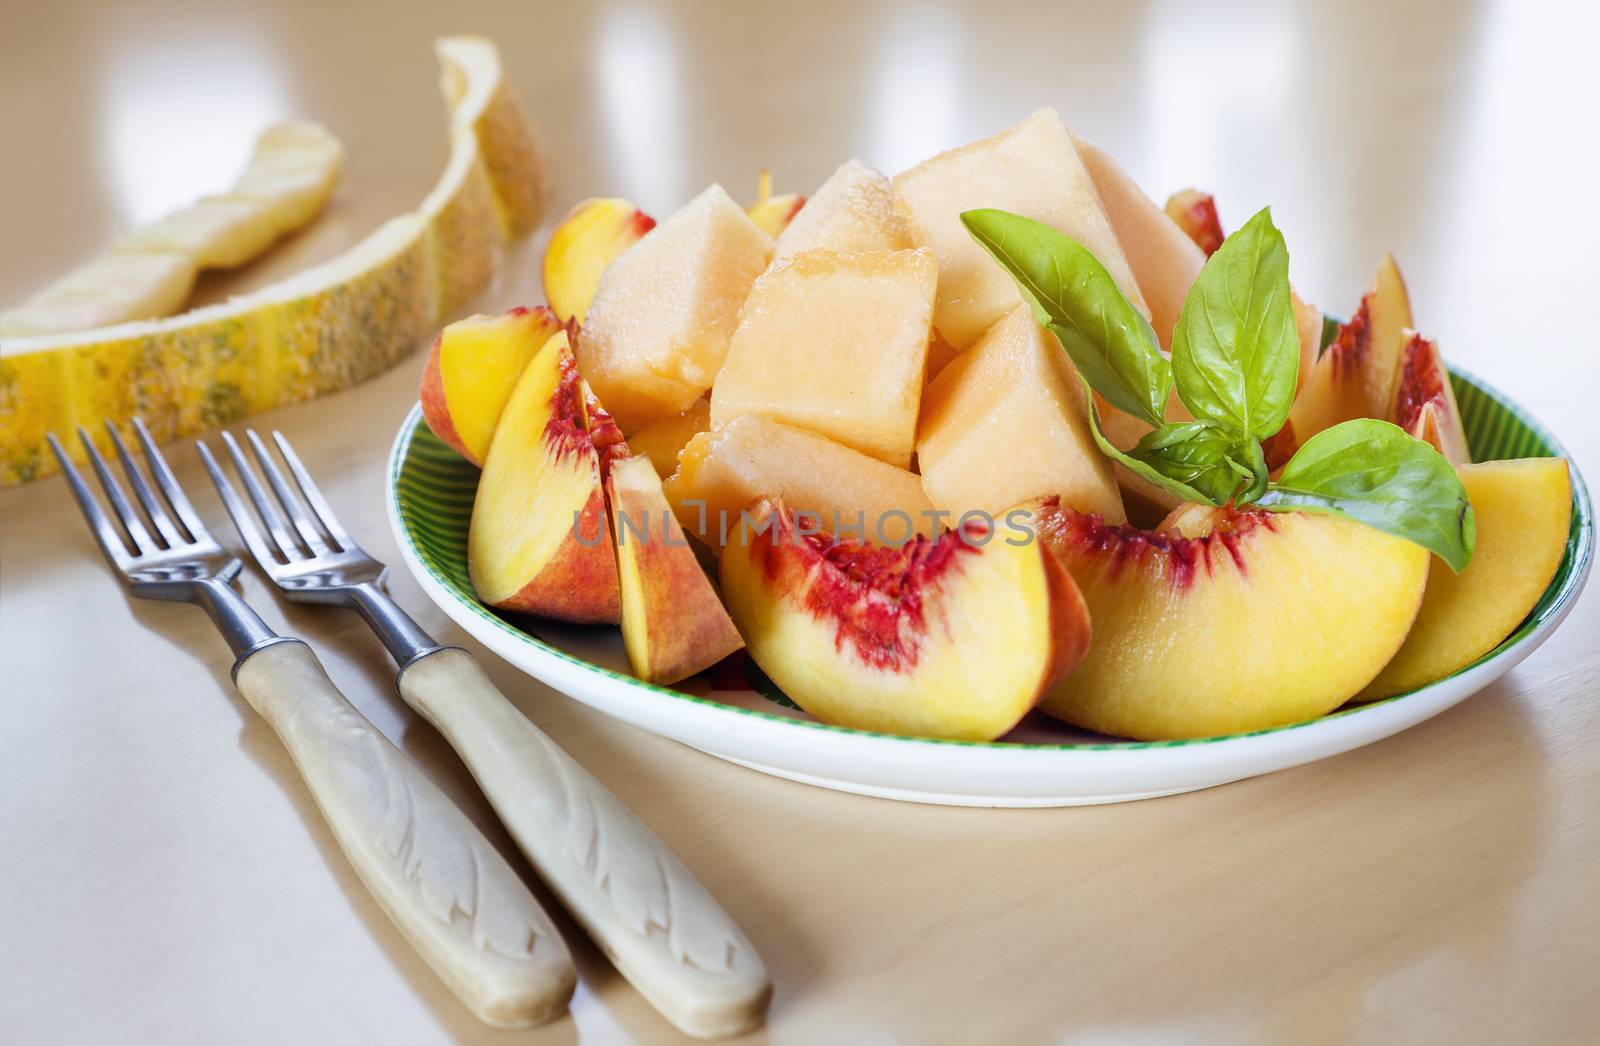 Plate with sliced fruits - peaches and melon with fresh basil and two forks